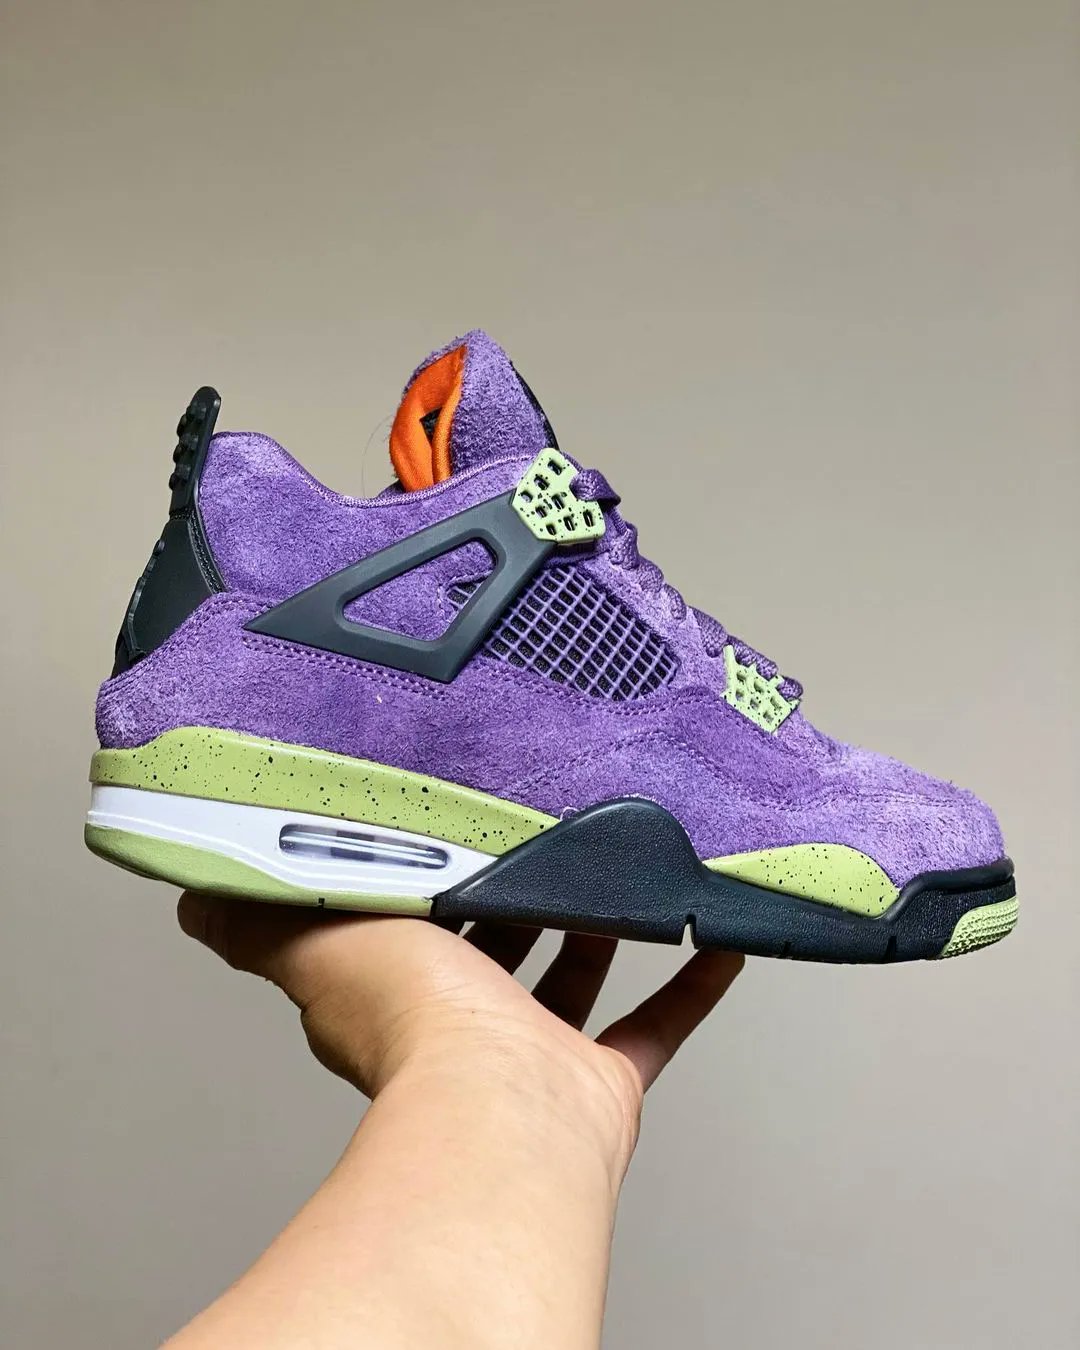 Air Jordan 4 Retro “Canyon Purple” Release Moved Up